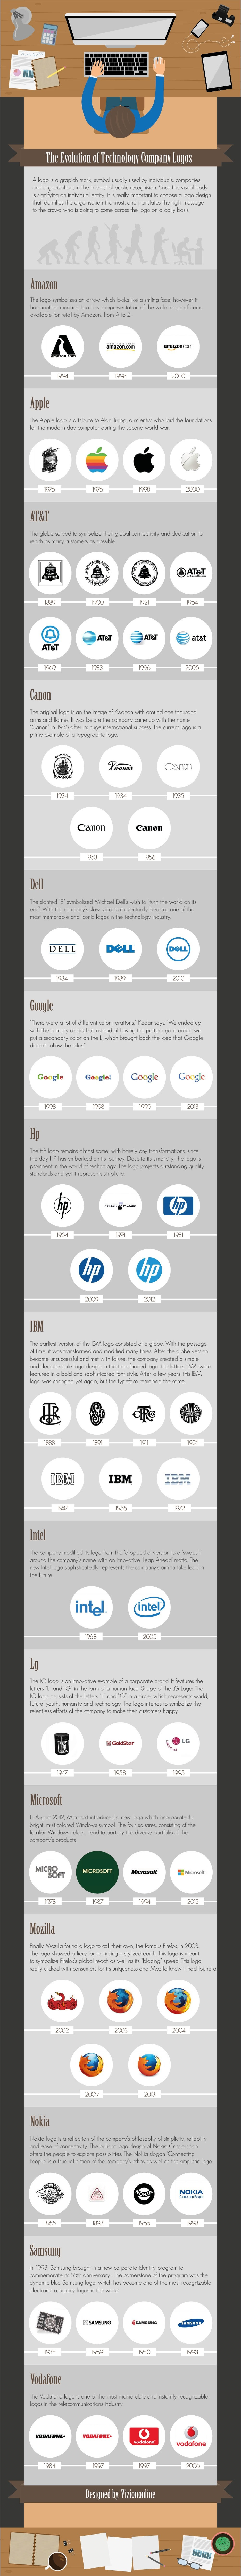 The Evolution of Technology Company Logos #infographic